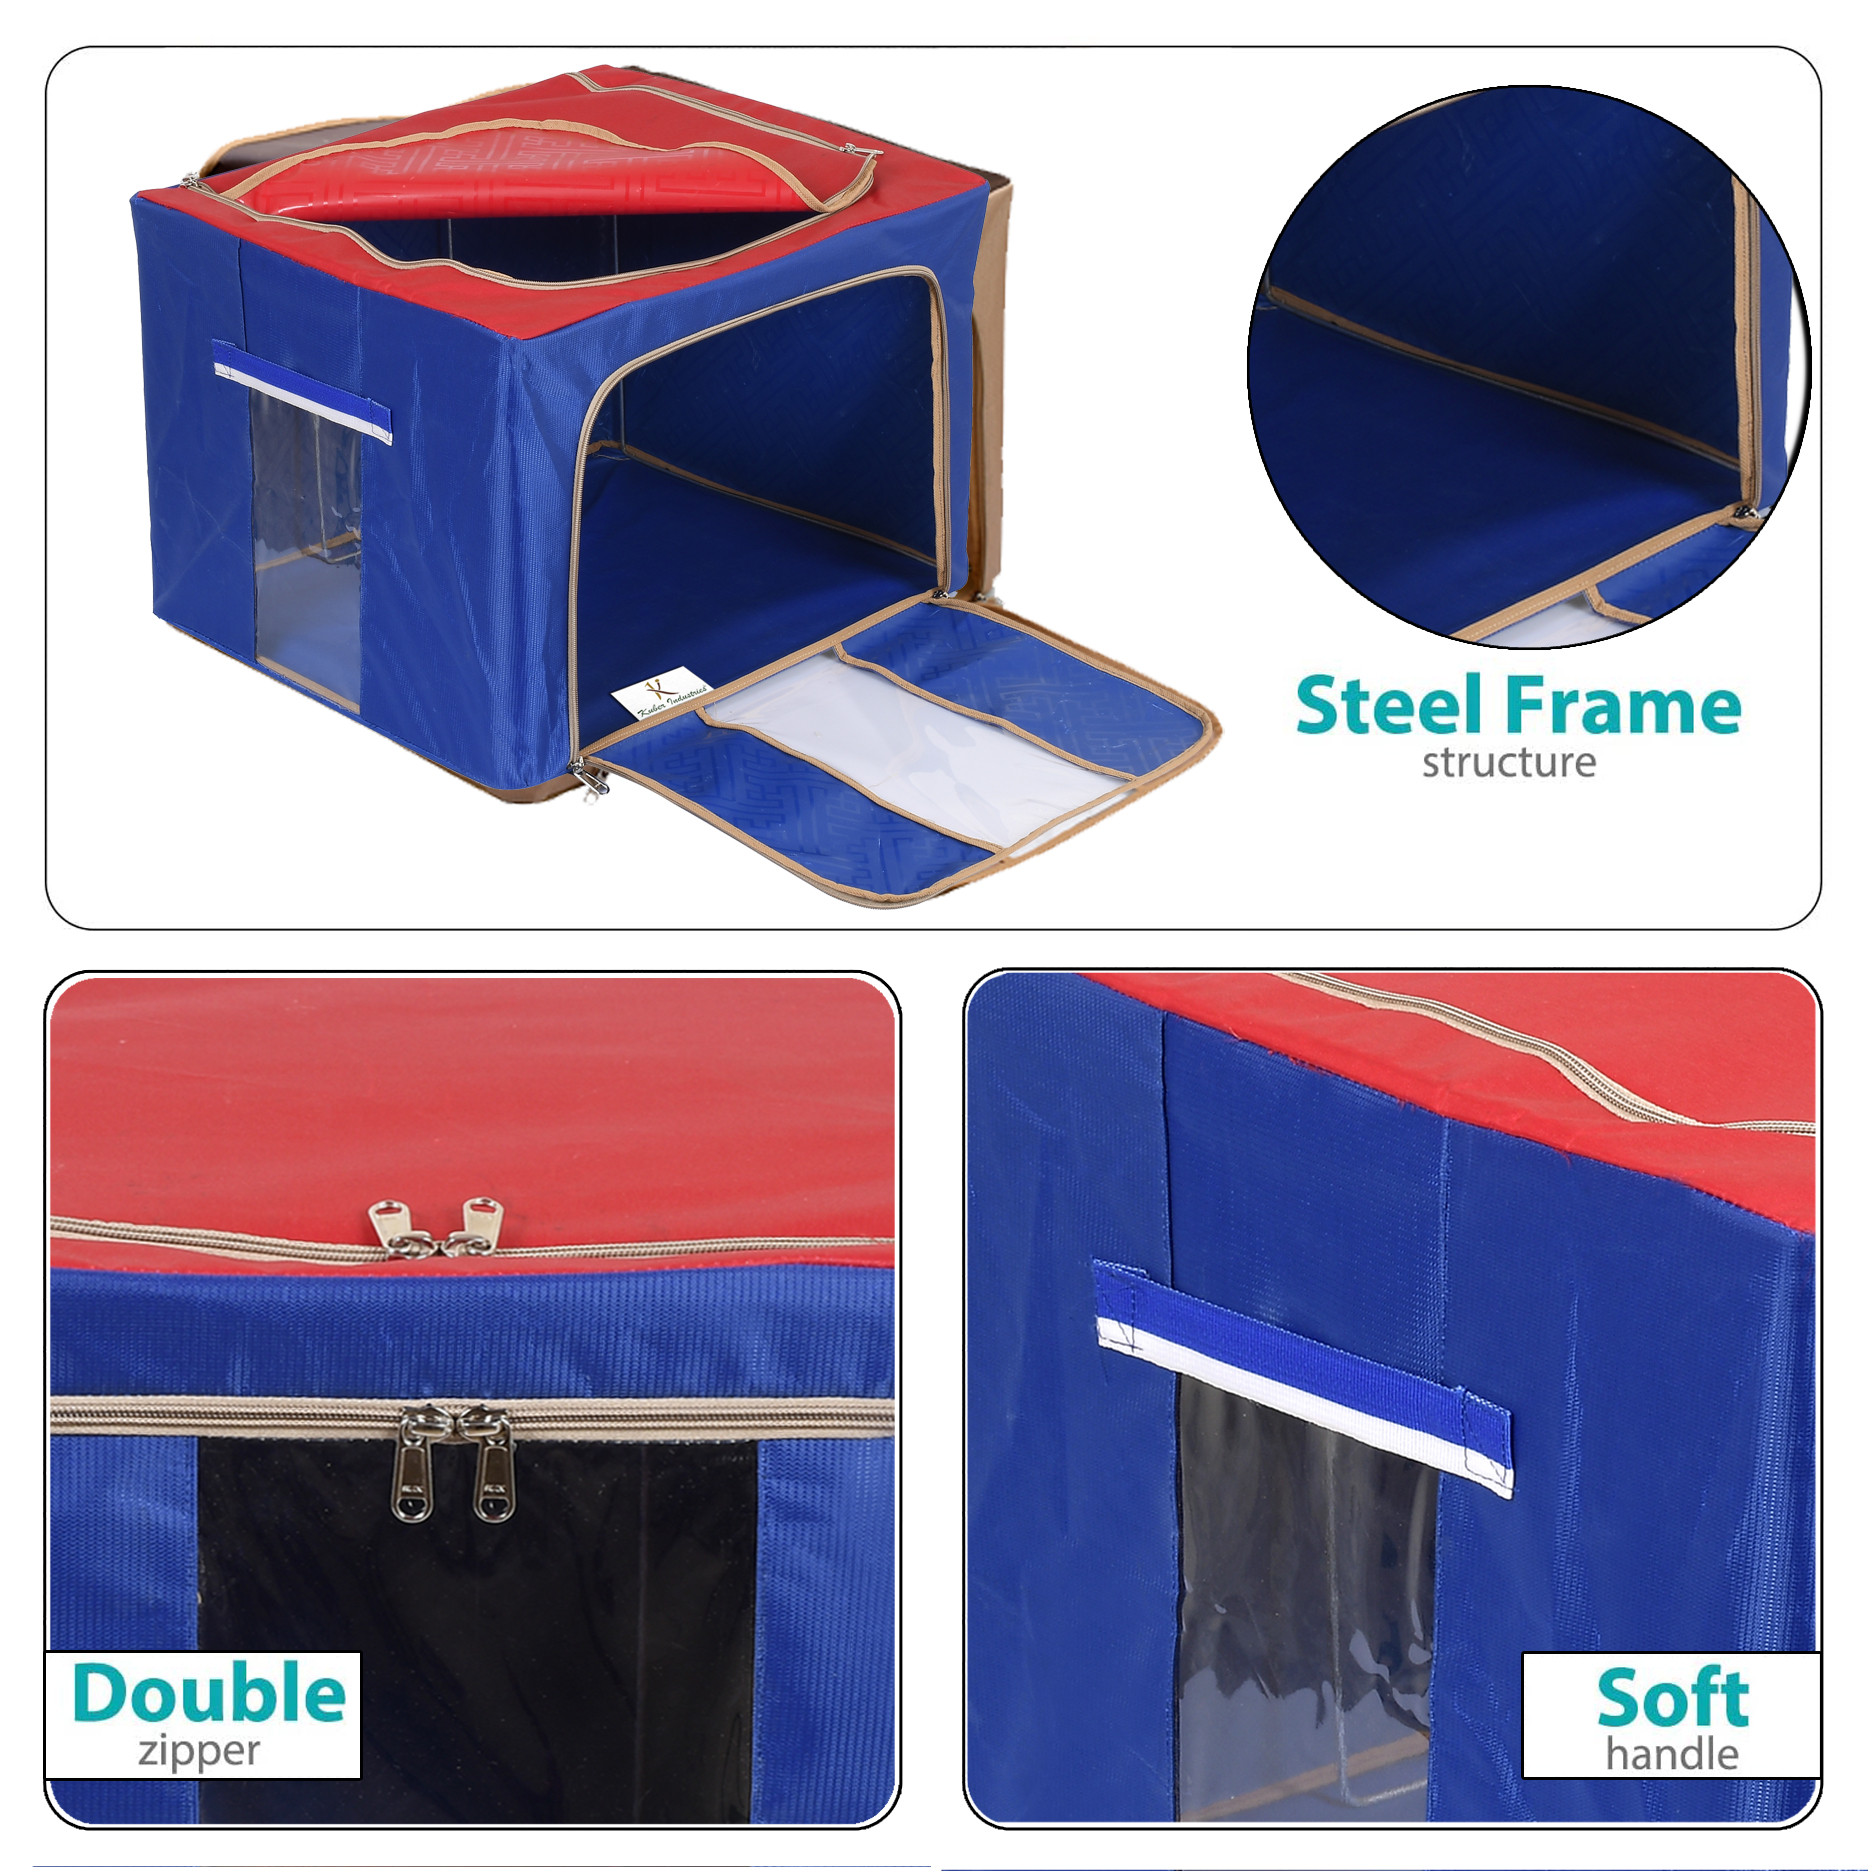 Kuber Industries Steel Frame Storage Box/Organizer For Clothing, Blankets, Bedding With Clear Window, 24Ltr. (Red & Blue)-44KM0285